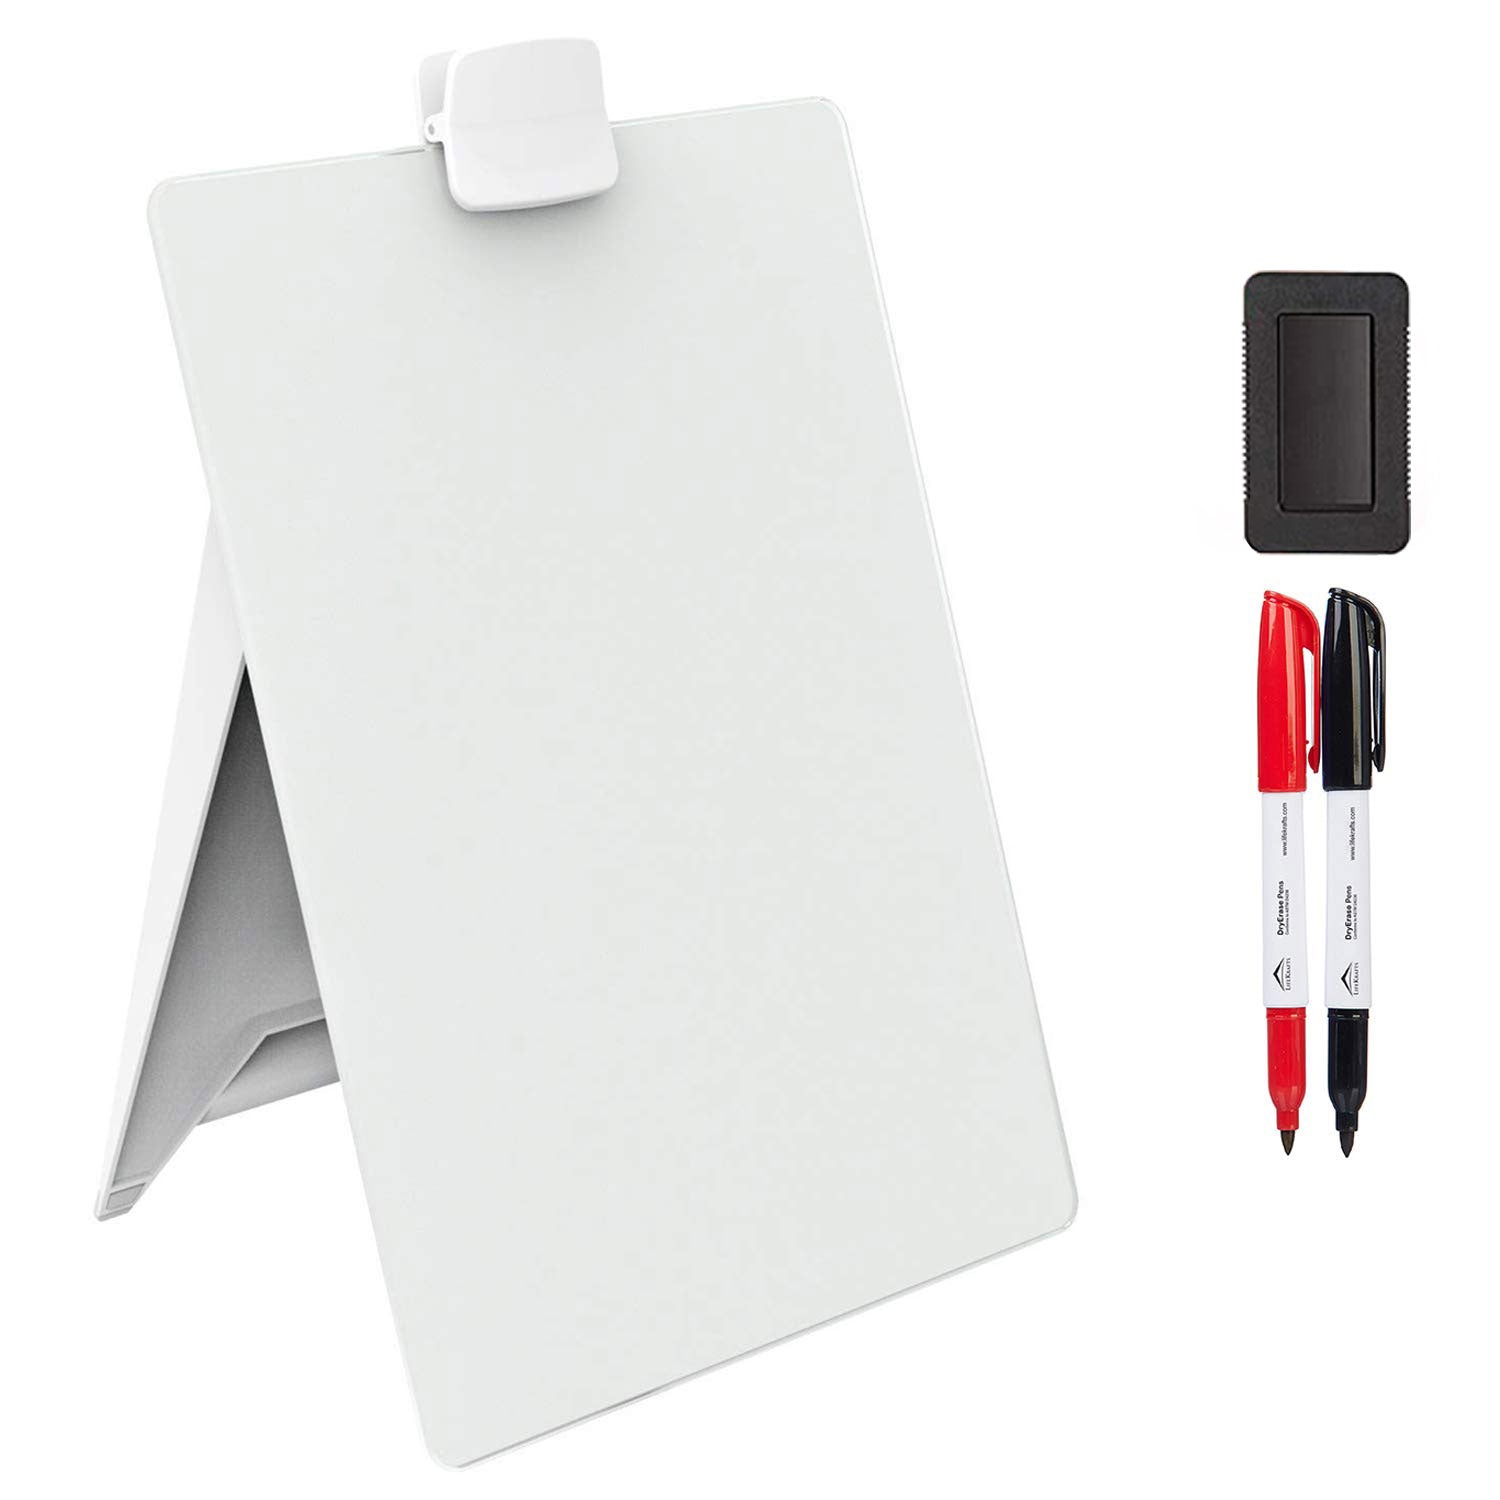 LifeKrafts Magnetic Adhesive Sheets, 12 x 12, Pack of 1, Make Anything  a Magnet!